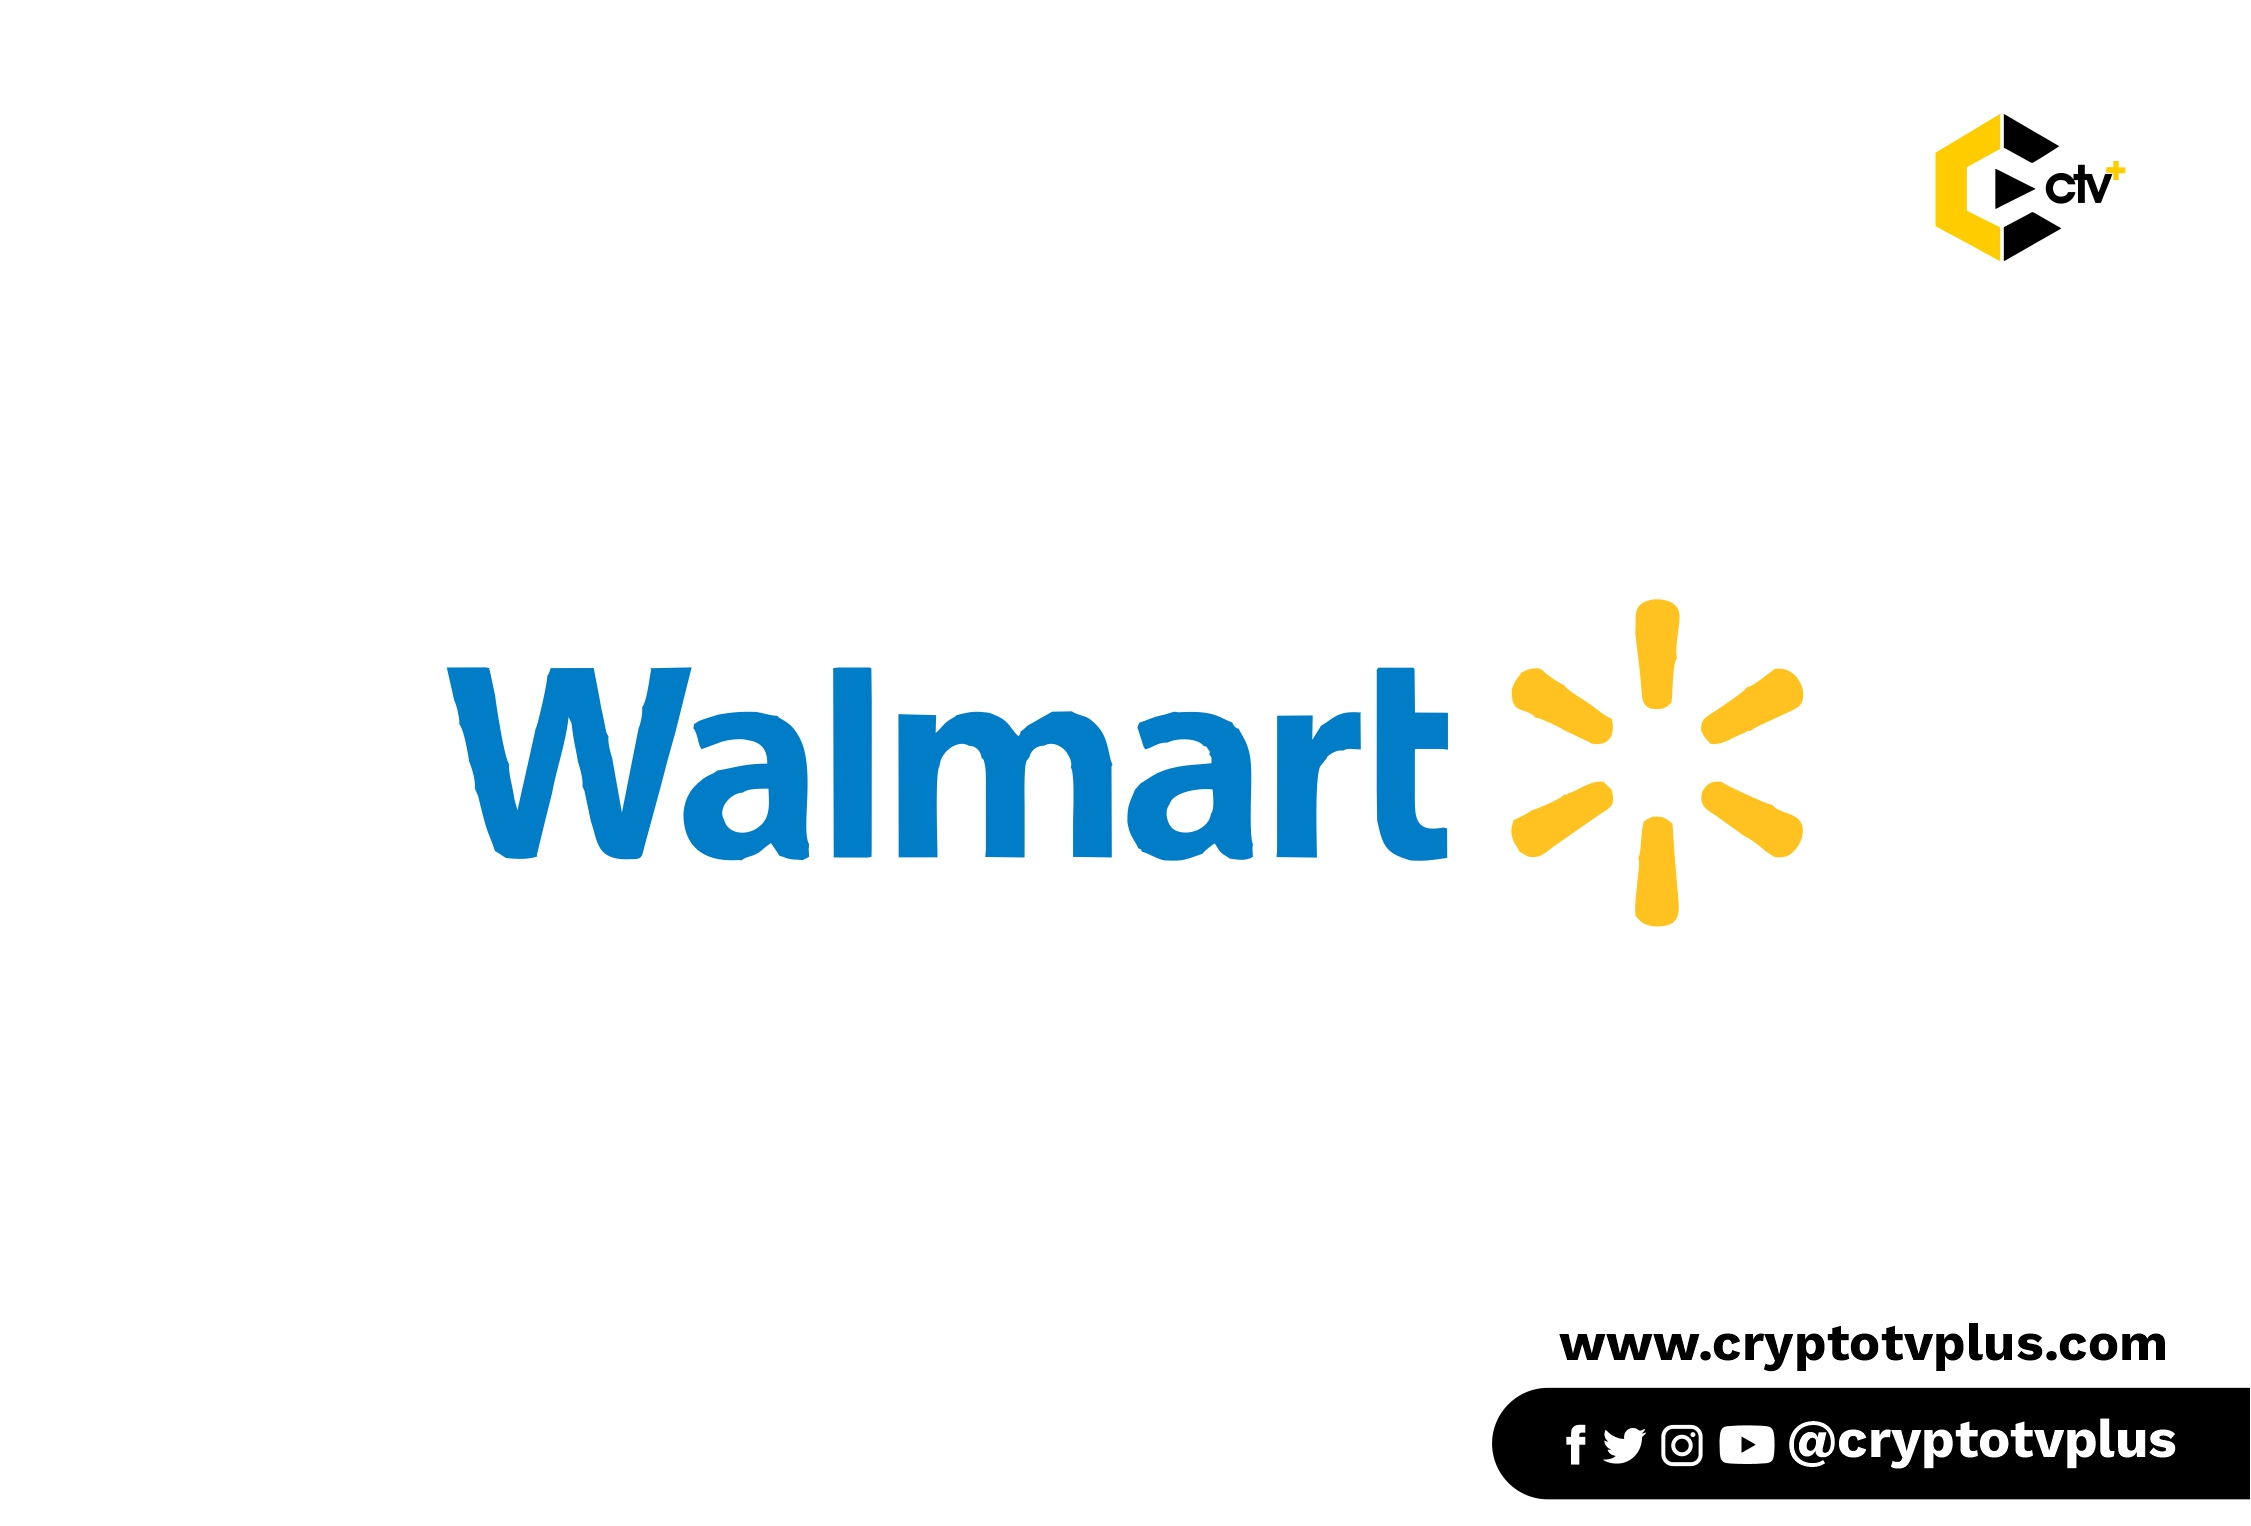 Walmart Might Be Readying itself for the Metaverse

